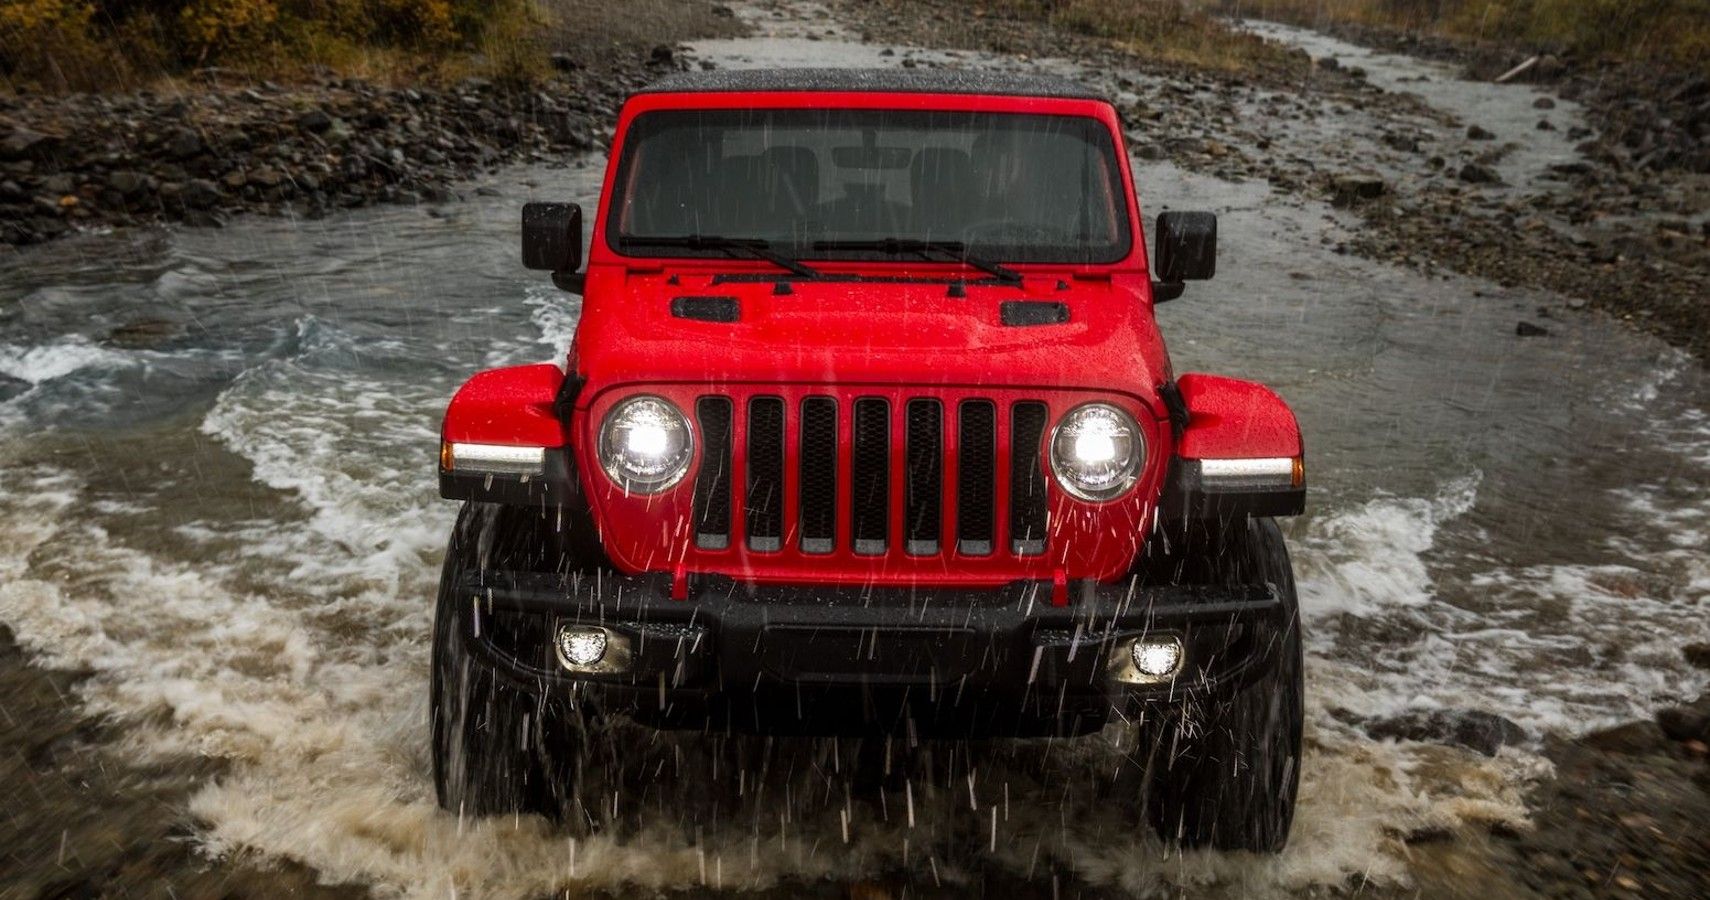 10 Jeeps That Will Bankrupt You Through Maintenance And Repairs